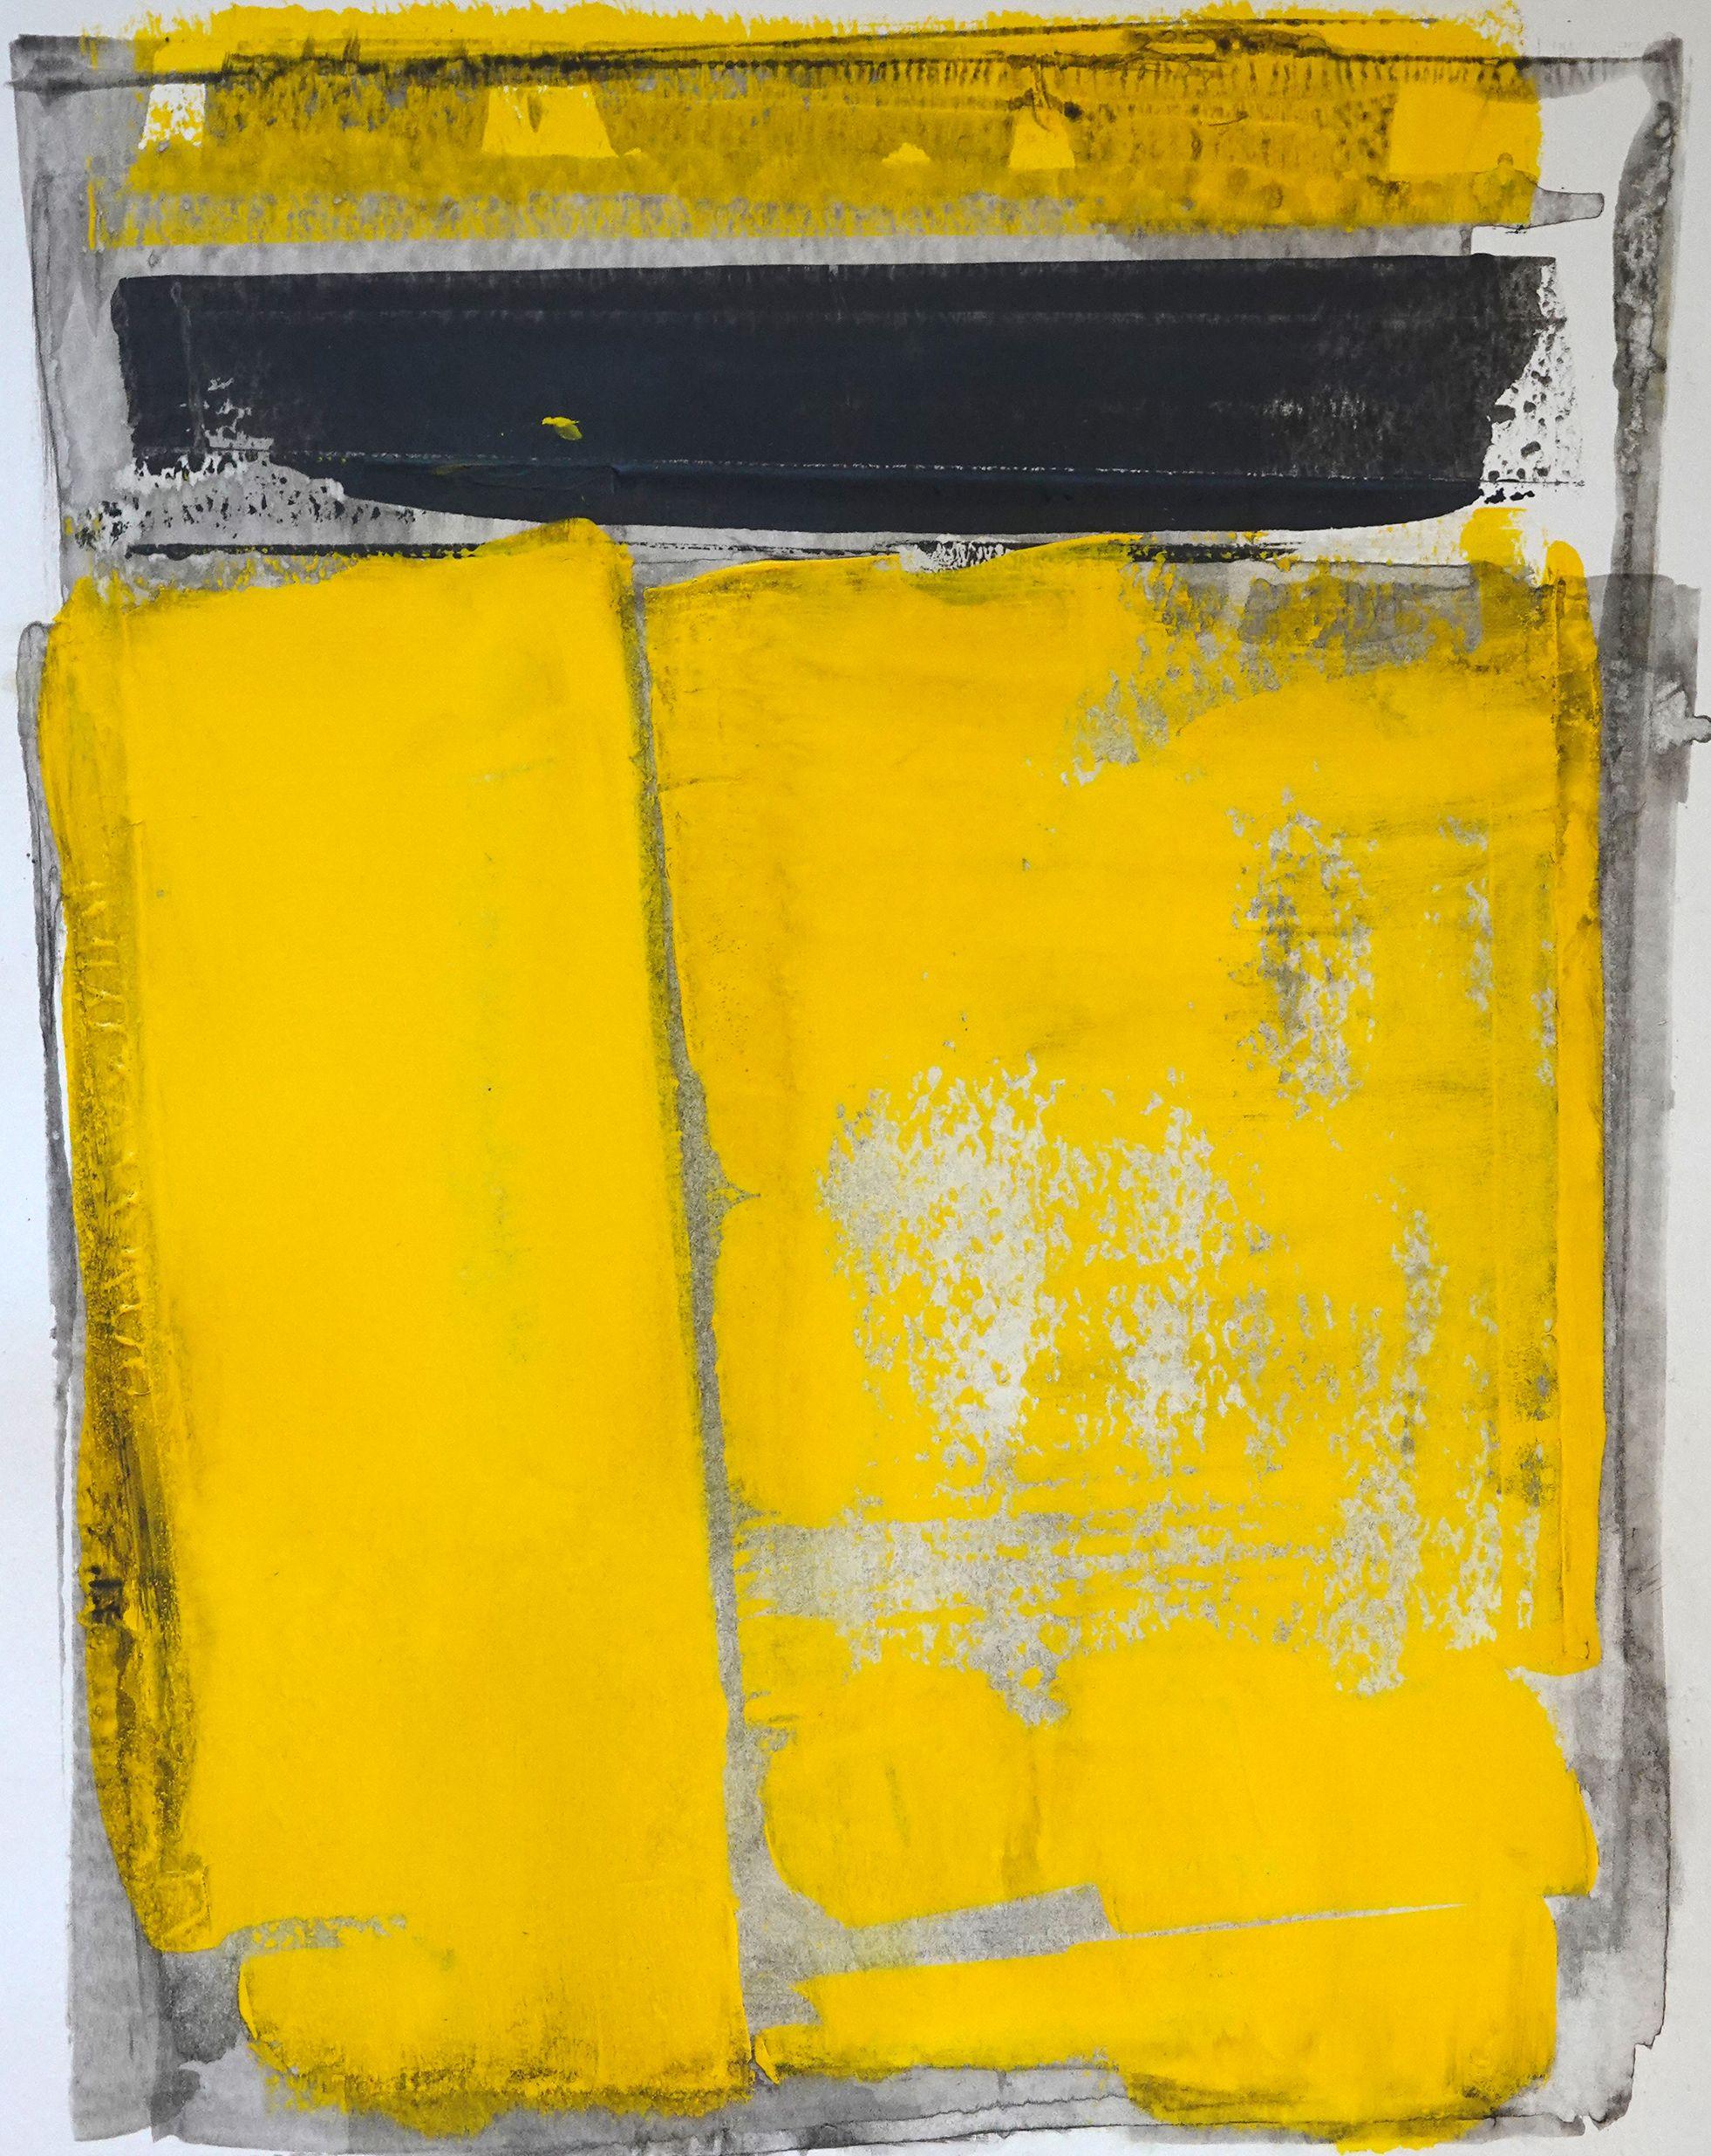 Static 401 Framed one of a kind painting with layers of yellow and gray.  Painting is 17X21â€ comes custom-framed in a 19X27X1.2â€ white   shadow box  Signed, dated and stamped on the front   ready to hang.   great piece on its own or part of a